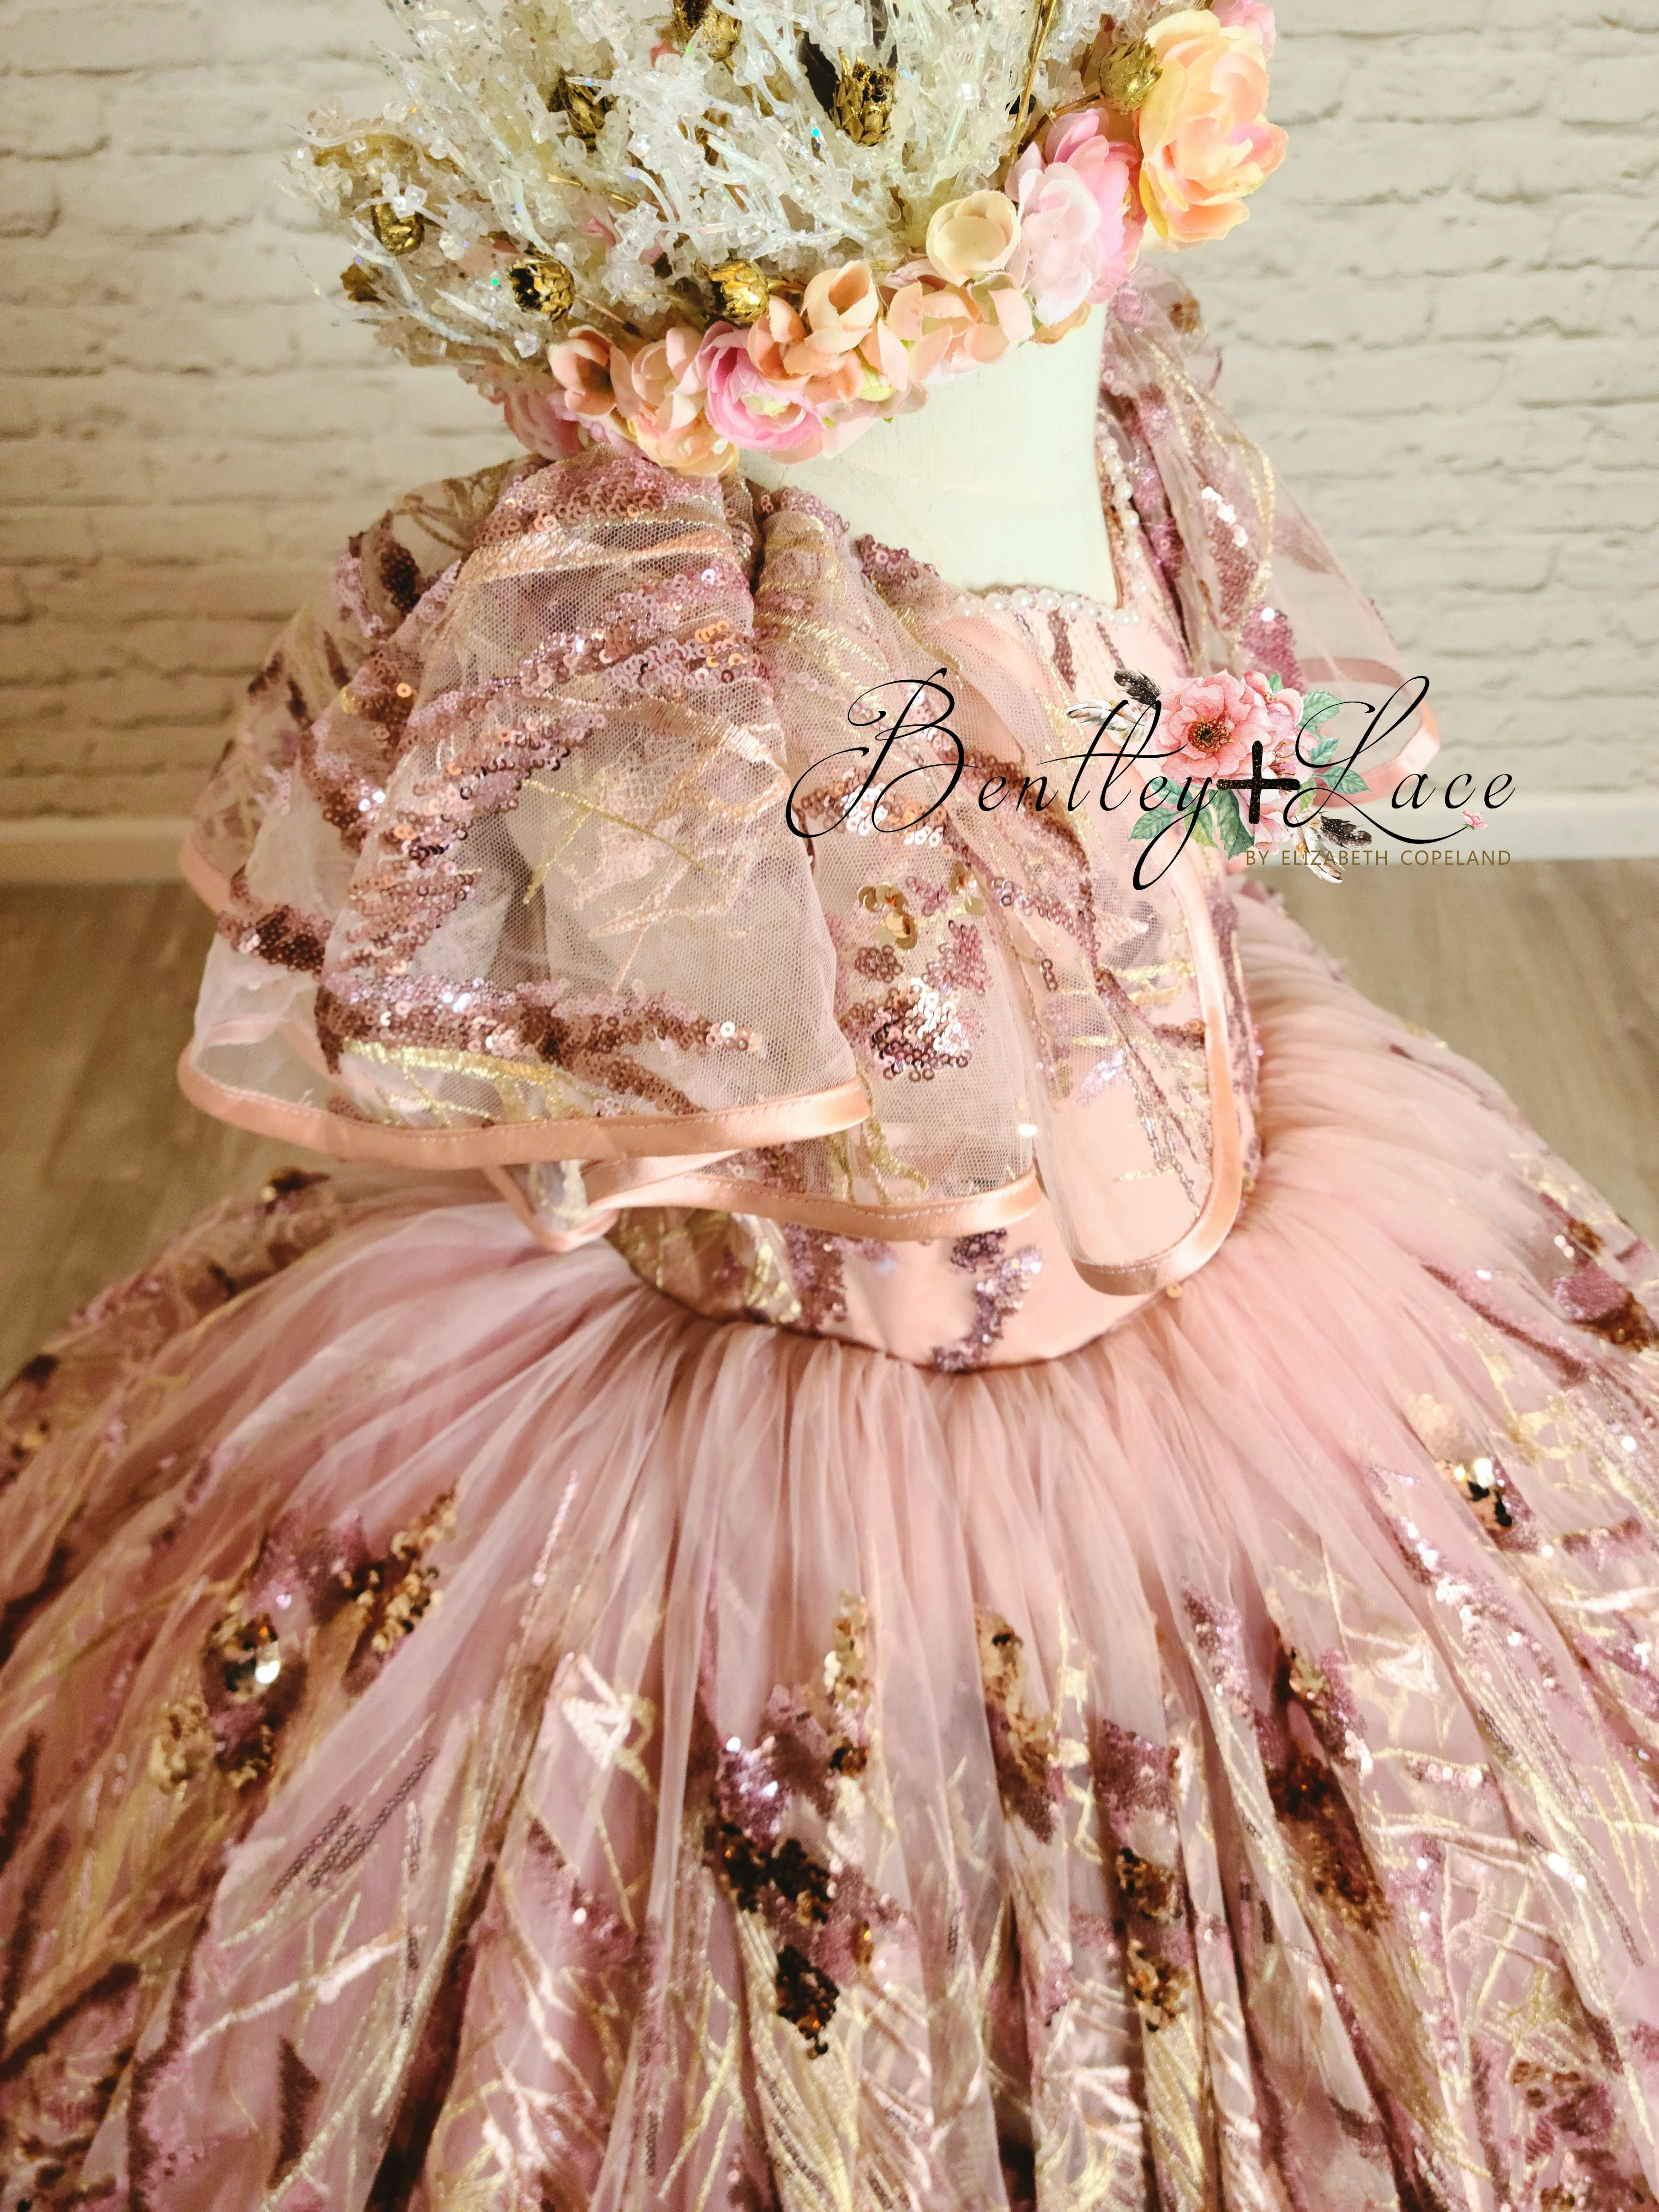 Retired rental - used condition,  no major defects. Sloane- Beautiful blush and sequin gown- Gorgeous special occasion or photo shoot dress (5 Year-Petite 8 Year)